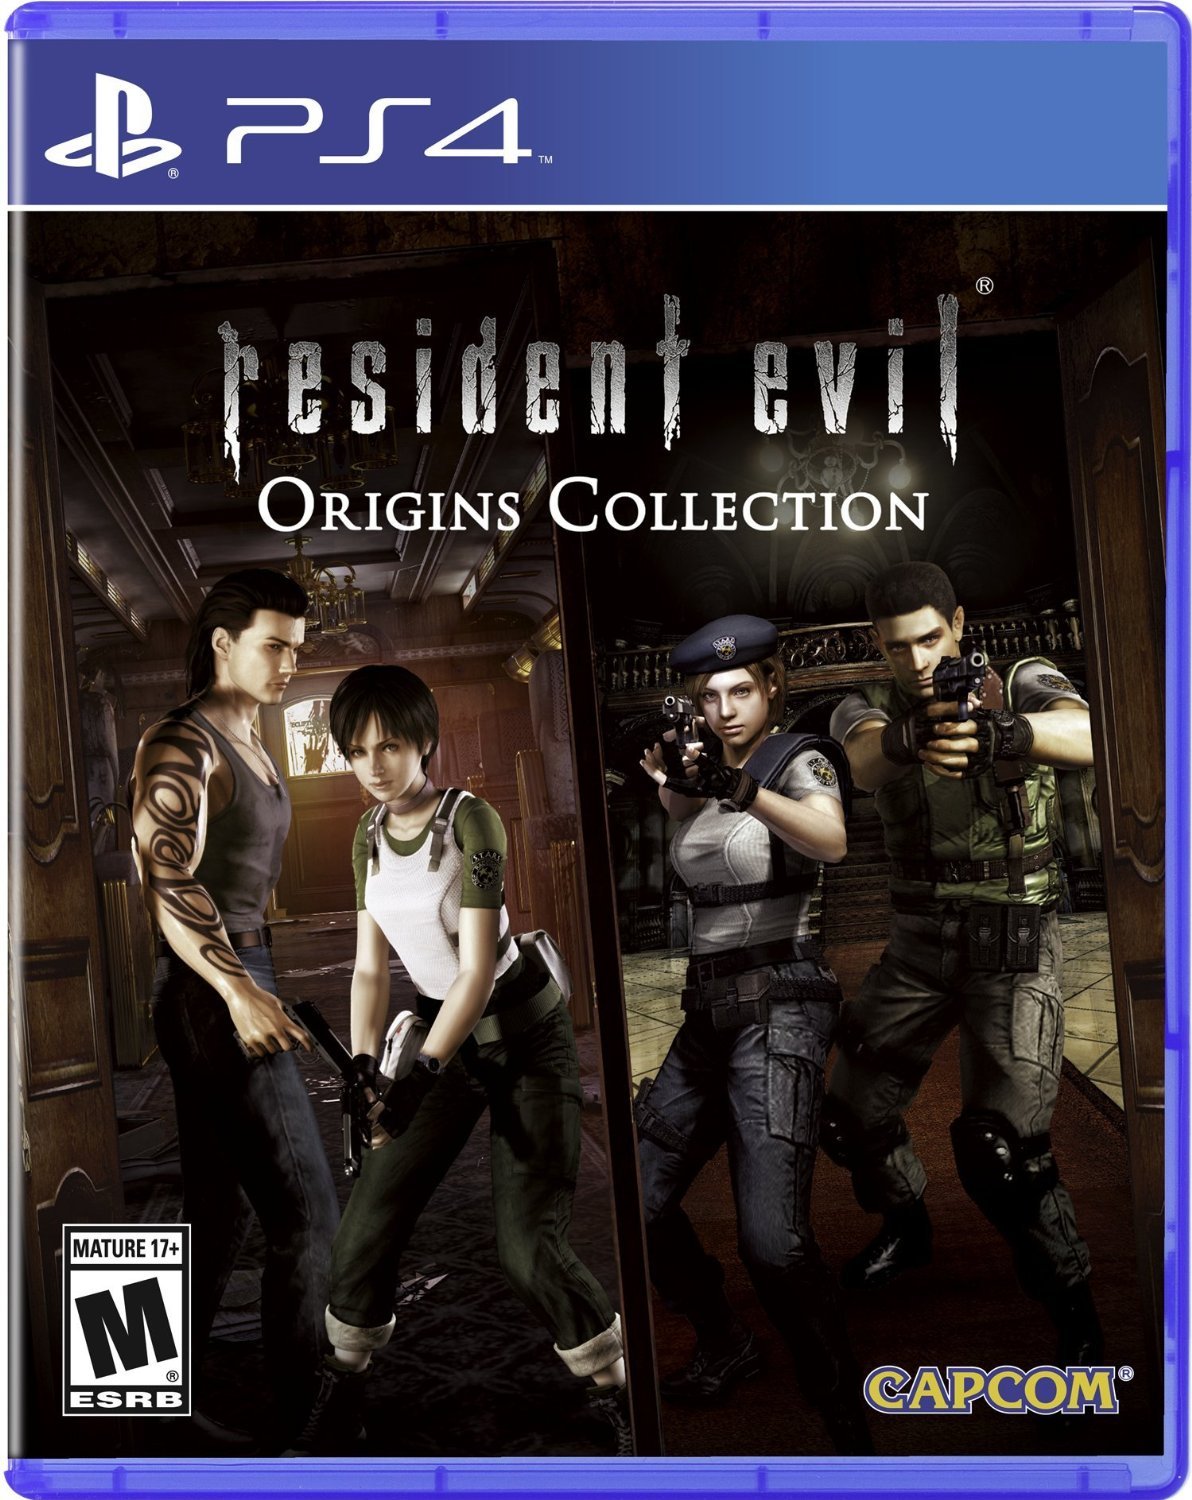 JUEGO PS4 RESIDENT EVIL ORIGINS COLLECTION MEDIO USO